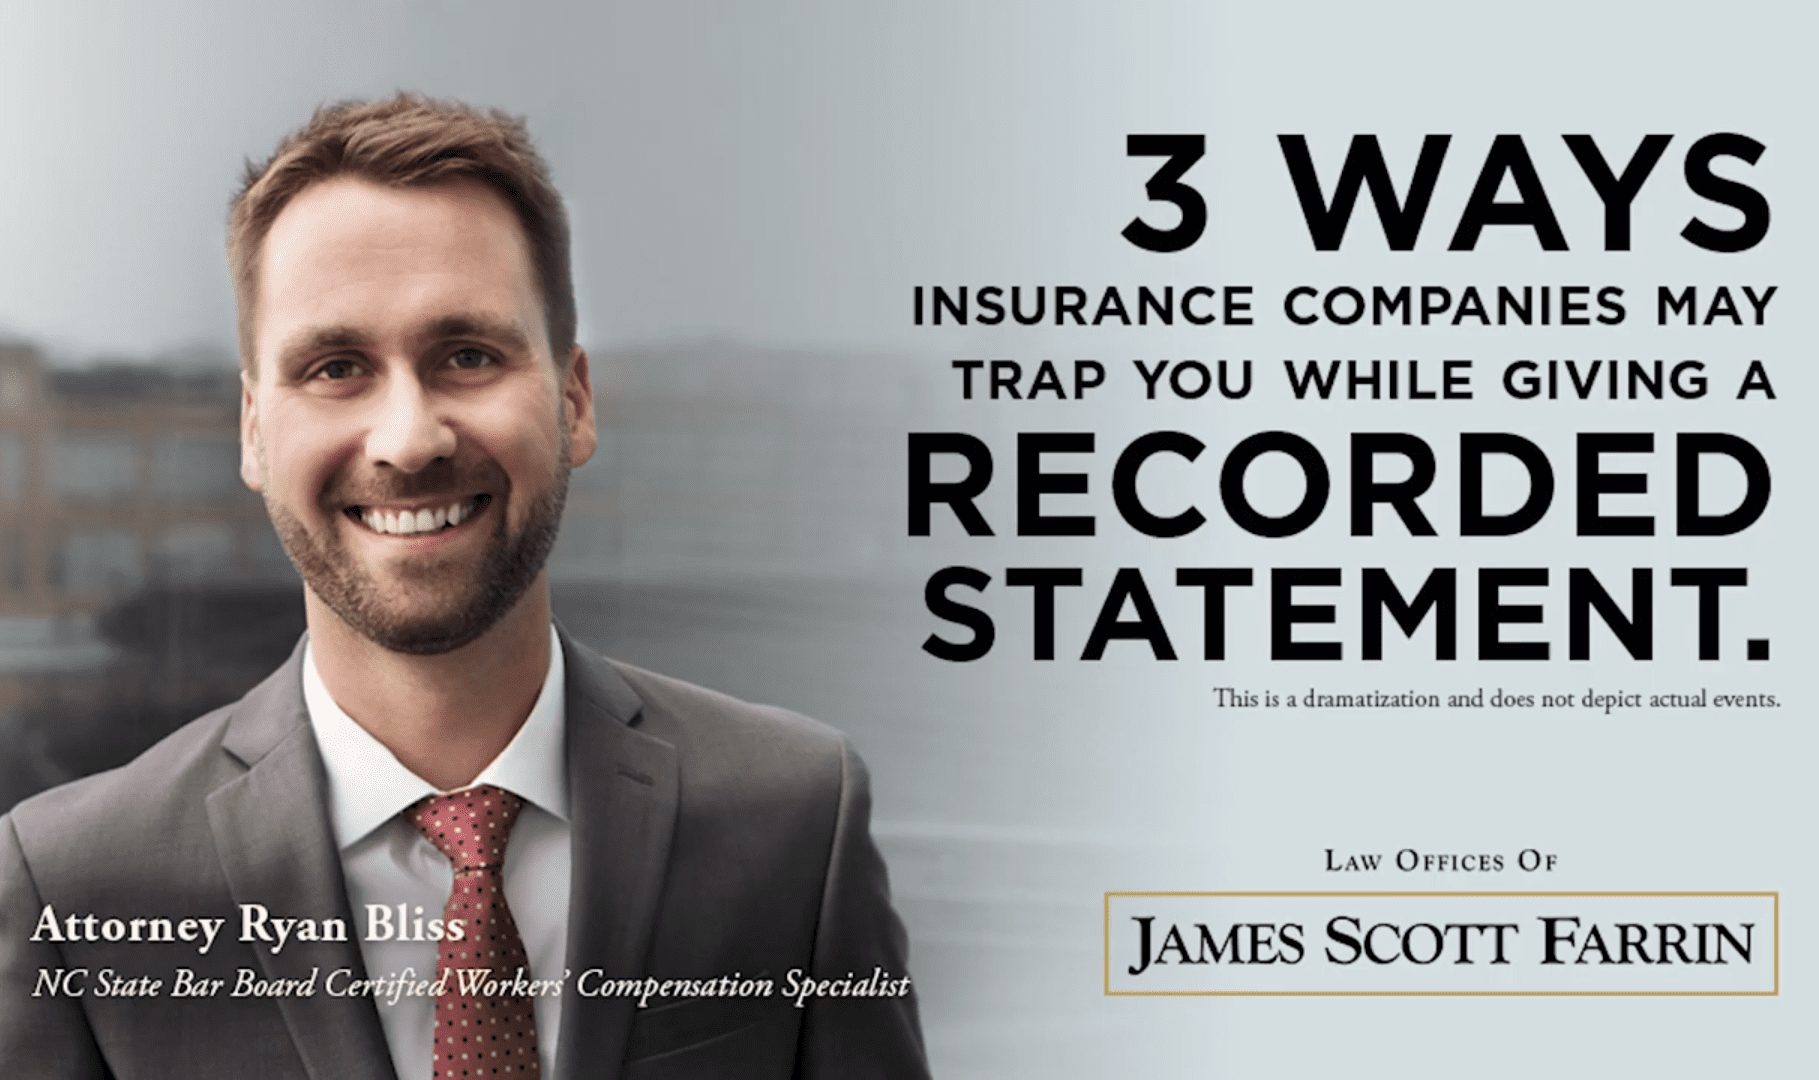 Ryan Bliss discusses 3 Ways Your Workers’ Comp “Recorded Statement” Can Trap You